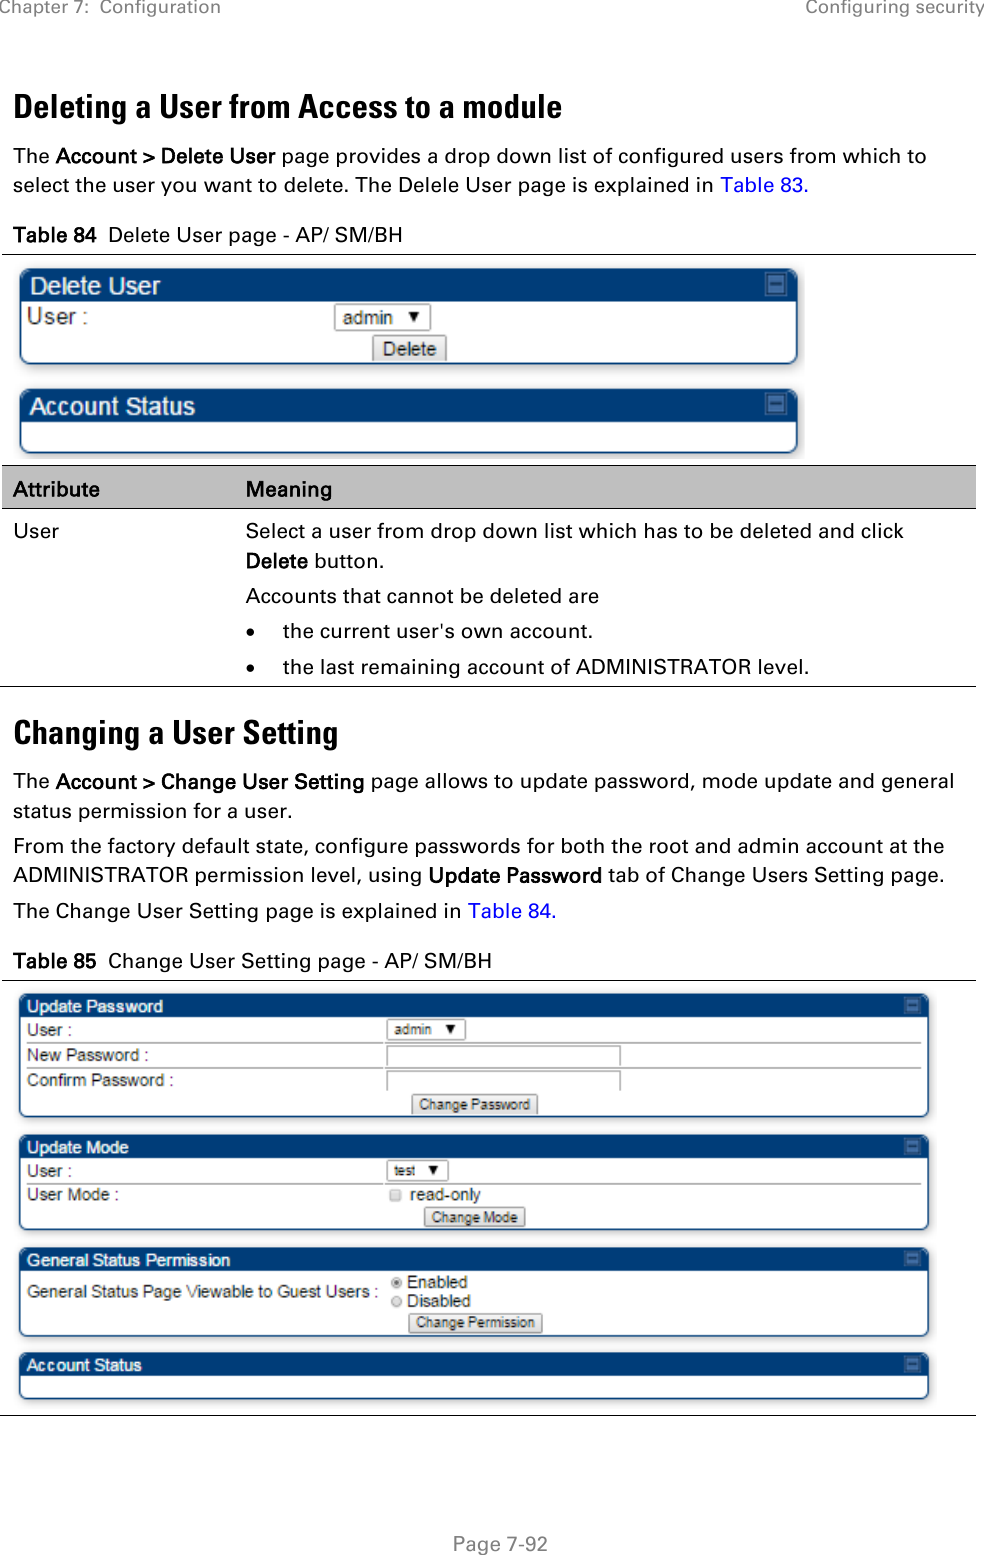 Chapter 7:  Configuration Configuring security   Page 7-92 Deleting a User from Access to a module The Account &gt; Delete User page provides a drop down list of configured users from which to select the user you want to delete. The Delele User page is explained in Table 83. Table 84  Delete User page - AP/ SM/BH  Attribute Meaning User Select a user from drop down list which has to be deleted and click Delete button. Accounts that cannot be deleted are • the current user&apos;s own account. • the last remaining account of ADMINISTRATOR level. Changing a User Setting The Account &gt; Change User Setting page allows to update password, mode update and general status permission for a user.   From the factory default state, configure passwords for both the root and admin account at the ADMINISTRATOR permission level, using Update Password tab of Change Users Setting page.  The Change User Setting page is explained in Table 84. Table 85  Change User Setting page - AP/ SM/BH  